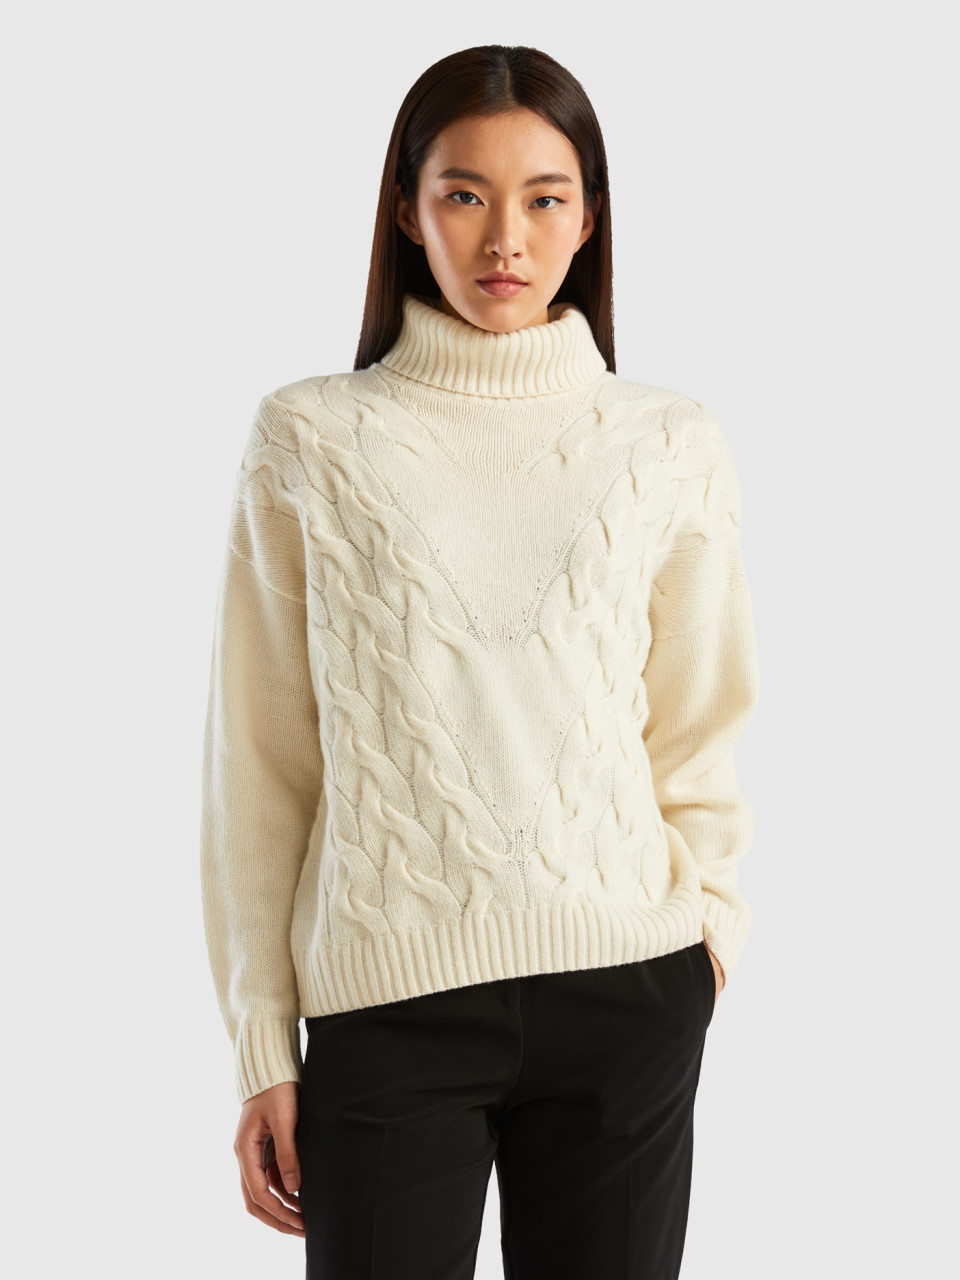 Benetton, Turtleneck With Cables, Creamy White, Women